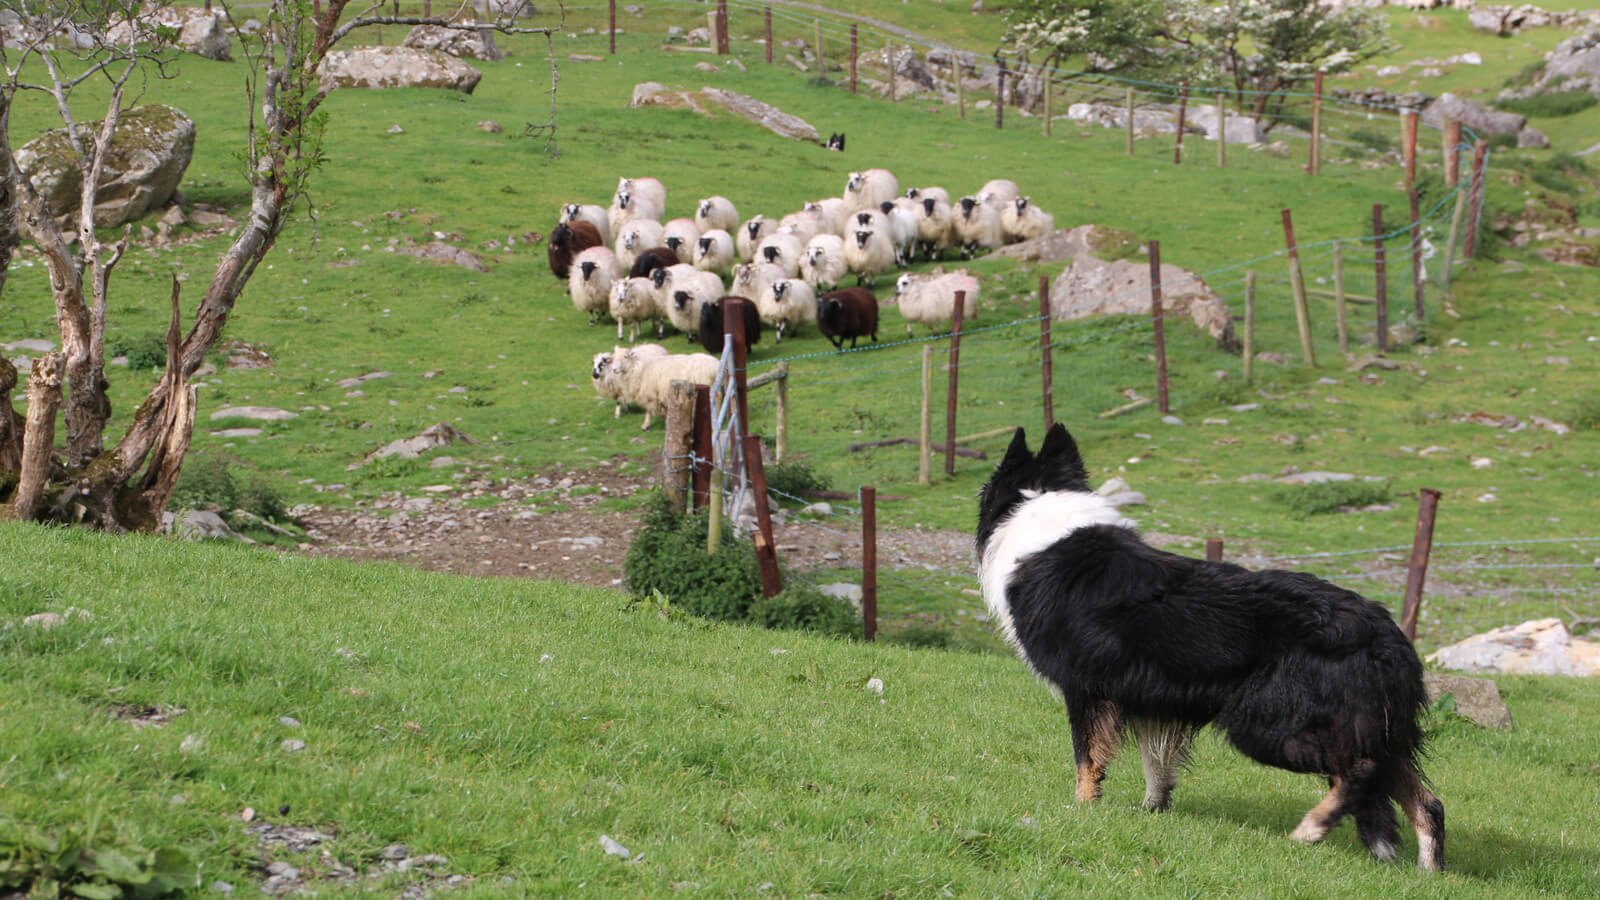 Sheepdog with flock of sheep in Ireland